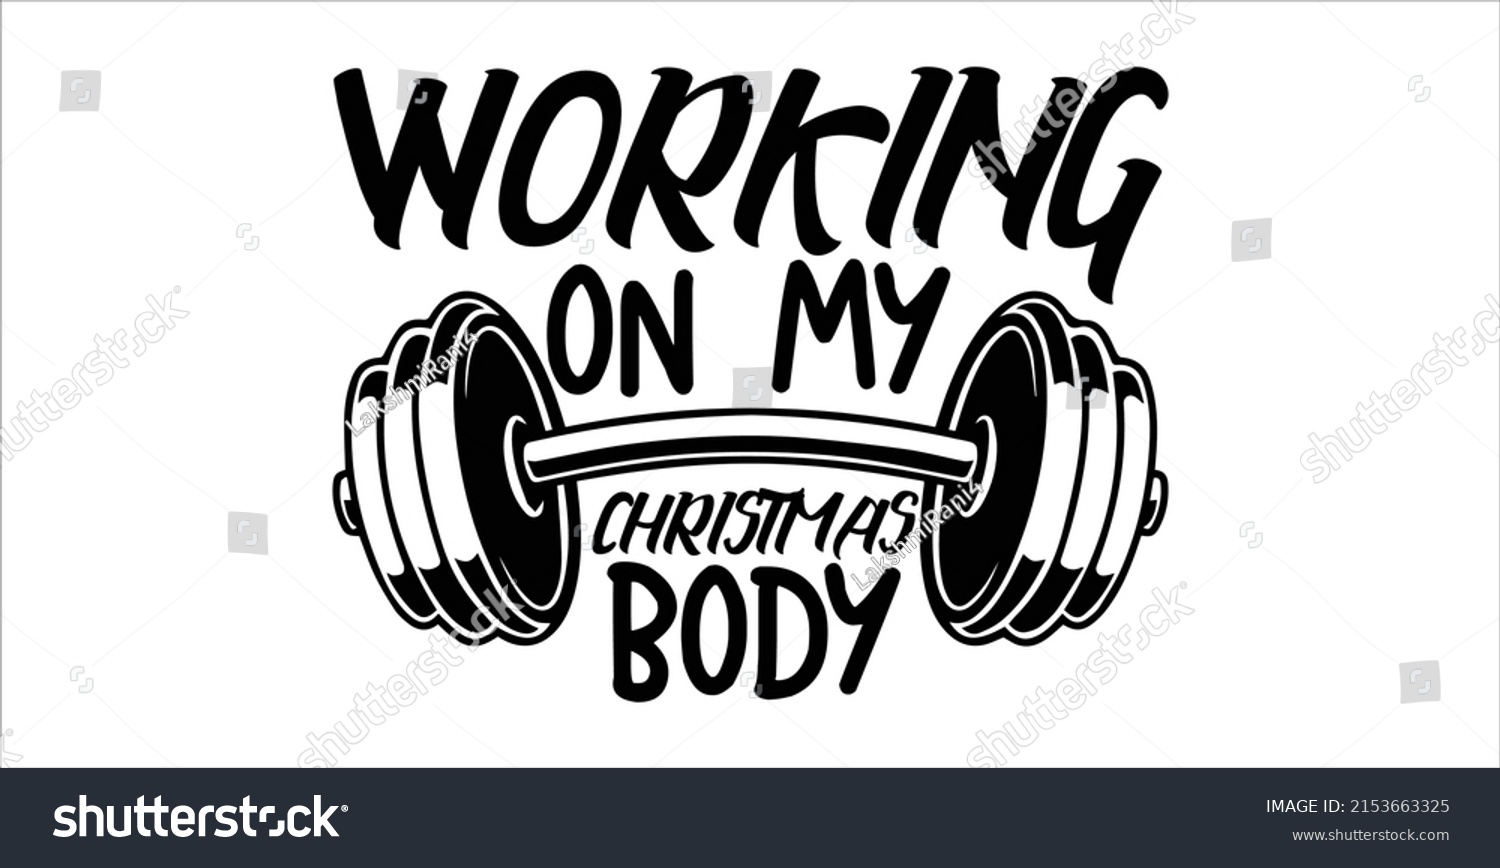 SVG of Working On My Christmas Body  -   Lettering design for greeting banners, Mouse Pads, Prints, Cards and Posters, Mugs, Notebooks, Floor Pillows and T-shirt prints design.
 svg